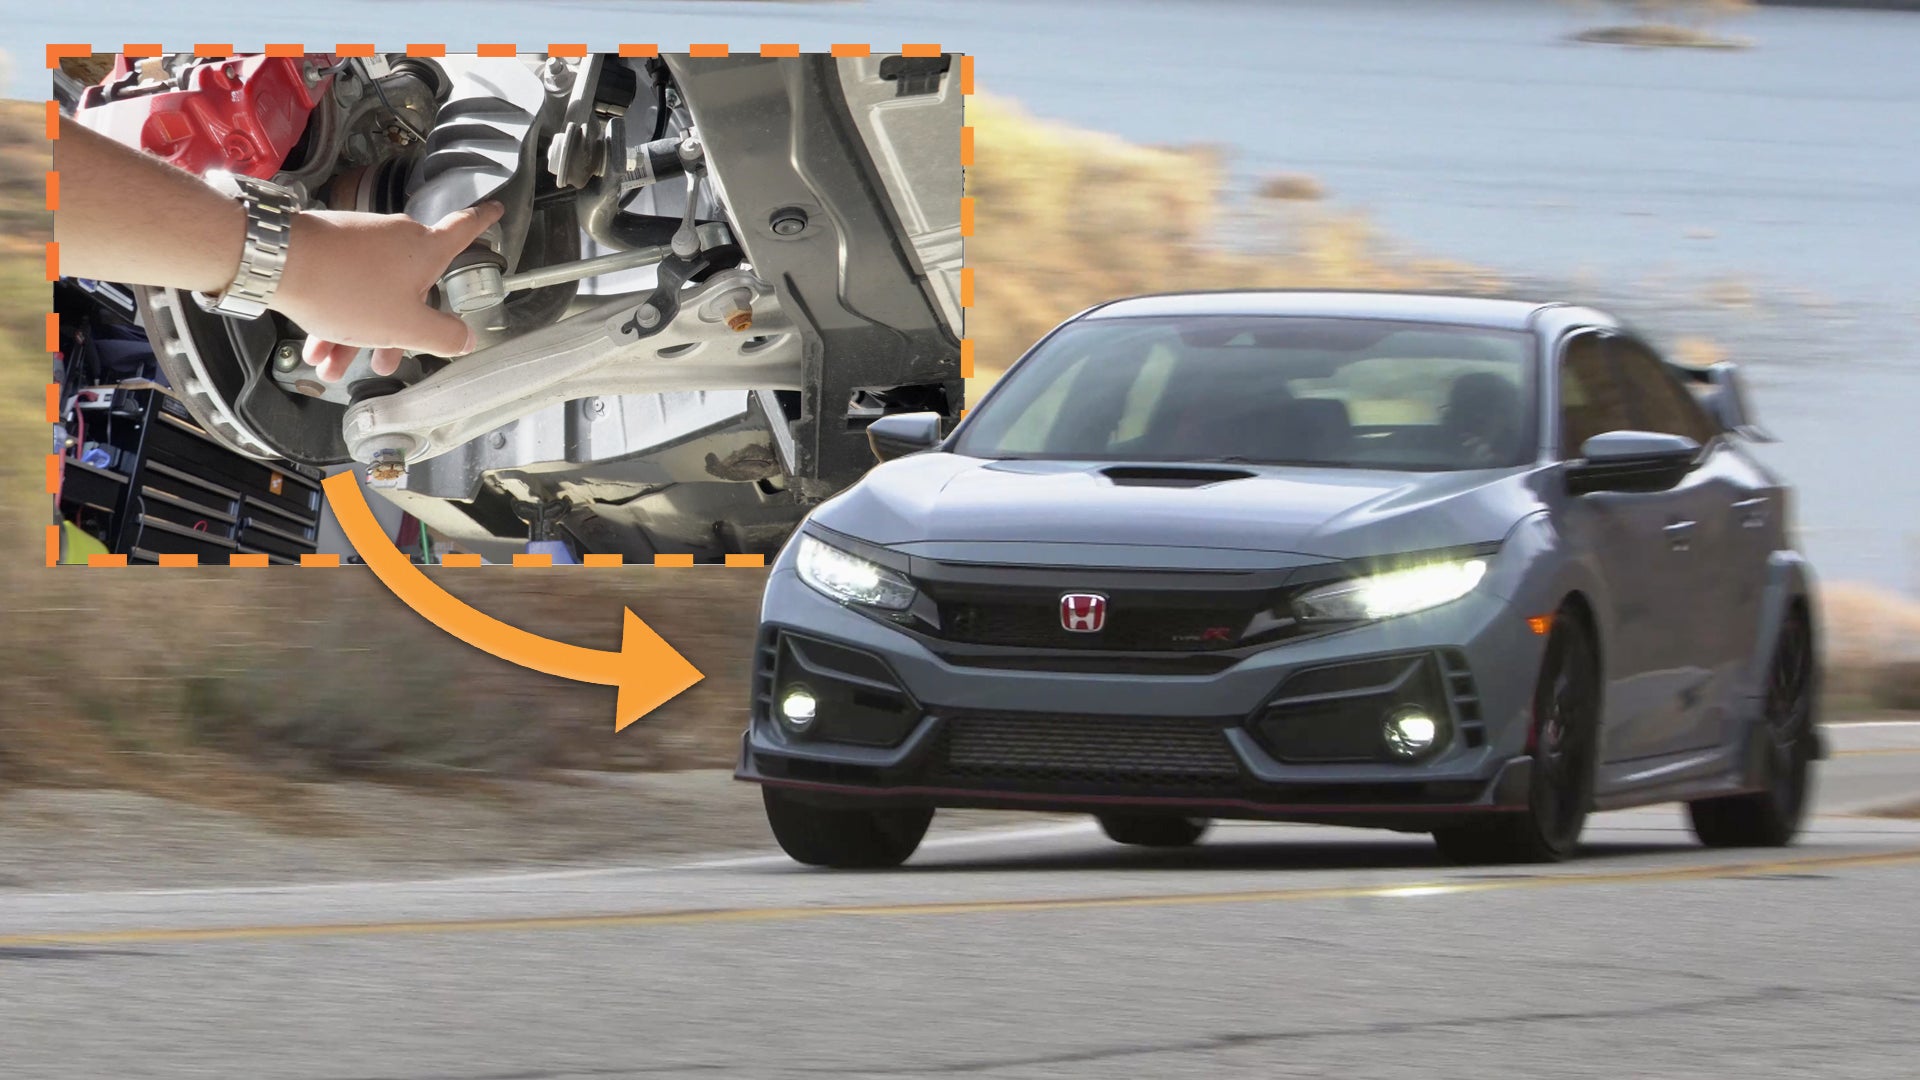 The Honda Civic Type R Is a Great Handler Thanks to This Special Suspension Setup